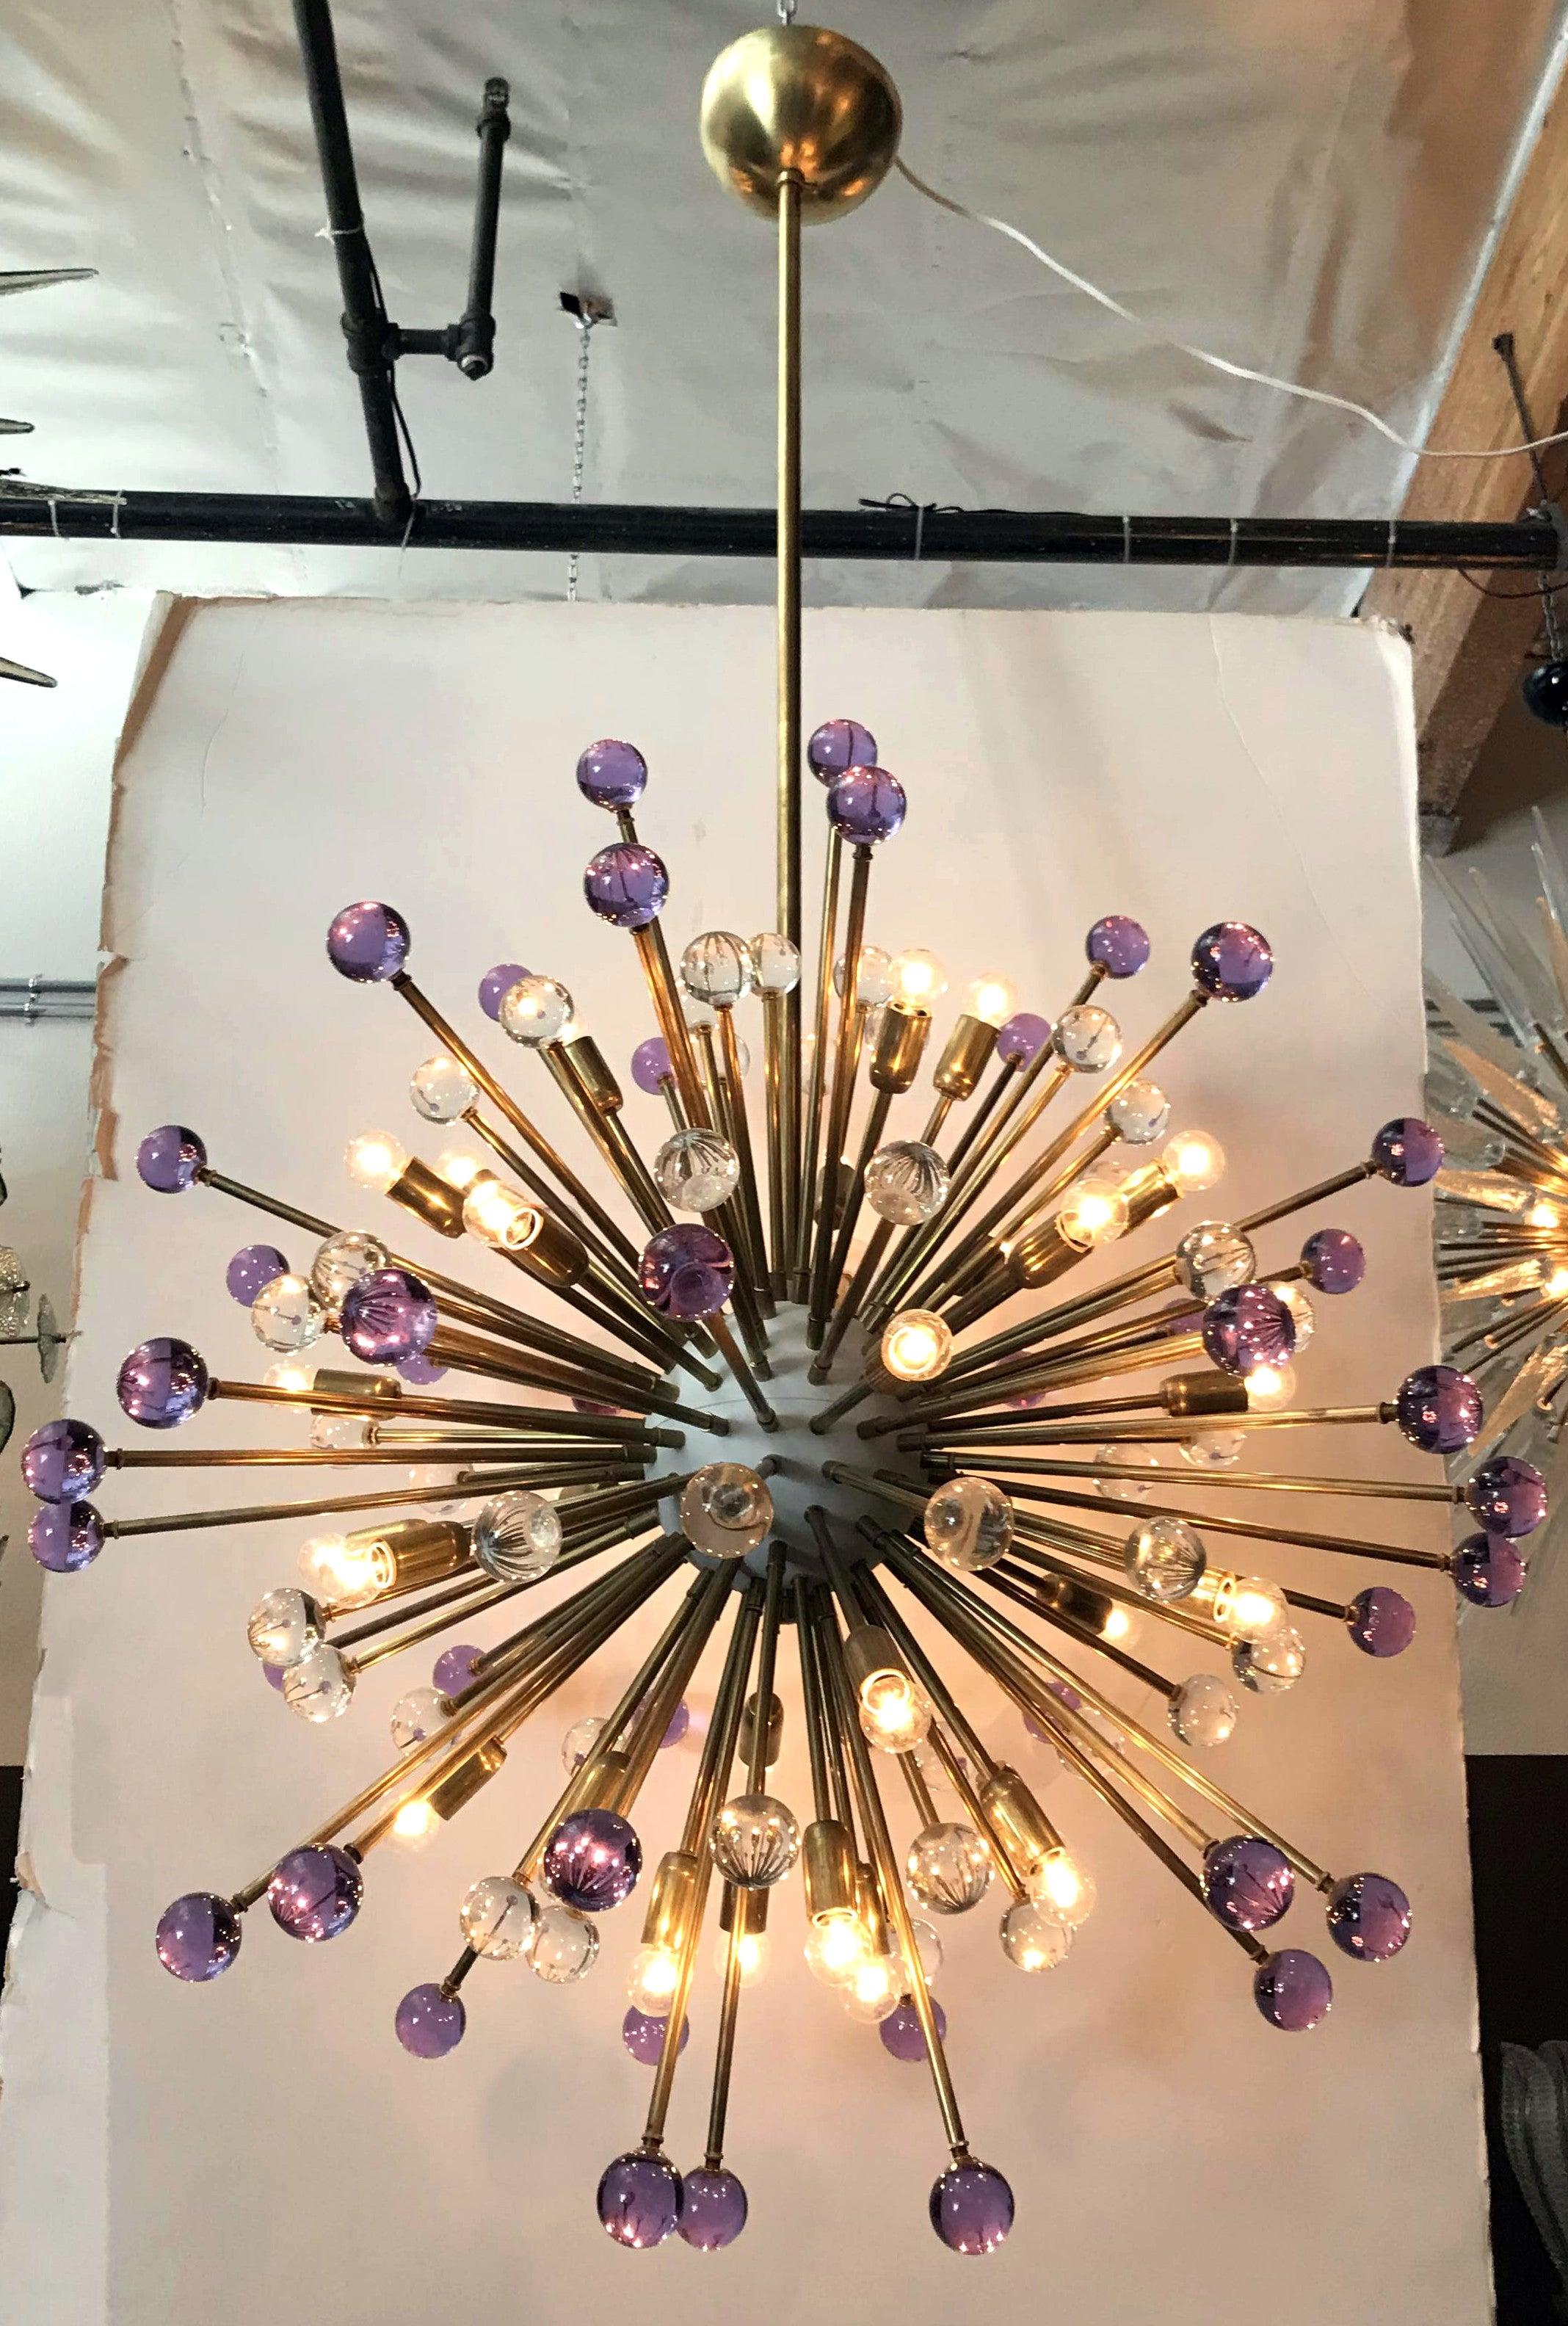 Italian modern Sputnik chandeliers with hand blown purple and clear Murano glass spheres, mounted on natural brass frames with white enameled center / Designed by Fabio Bergomi for Fabio Ltd / Made in Italy
30 lights / E12 or E14 type / max 40W